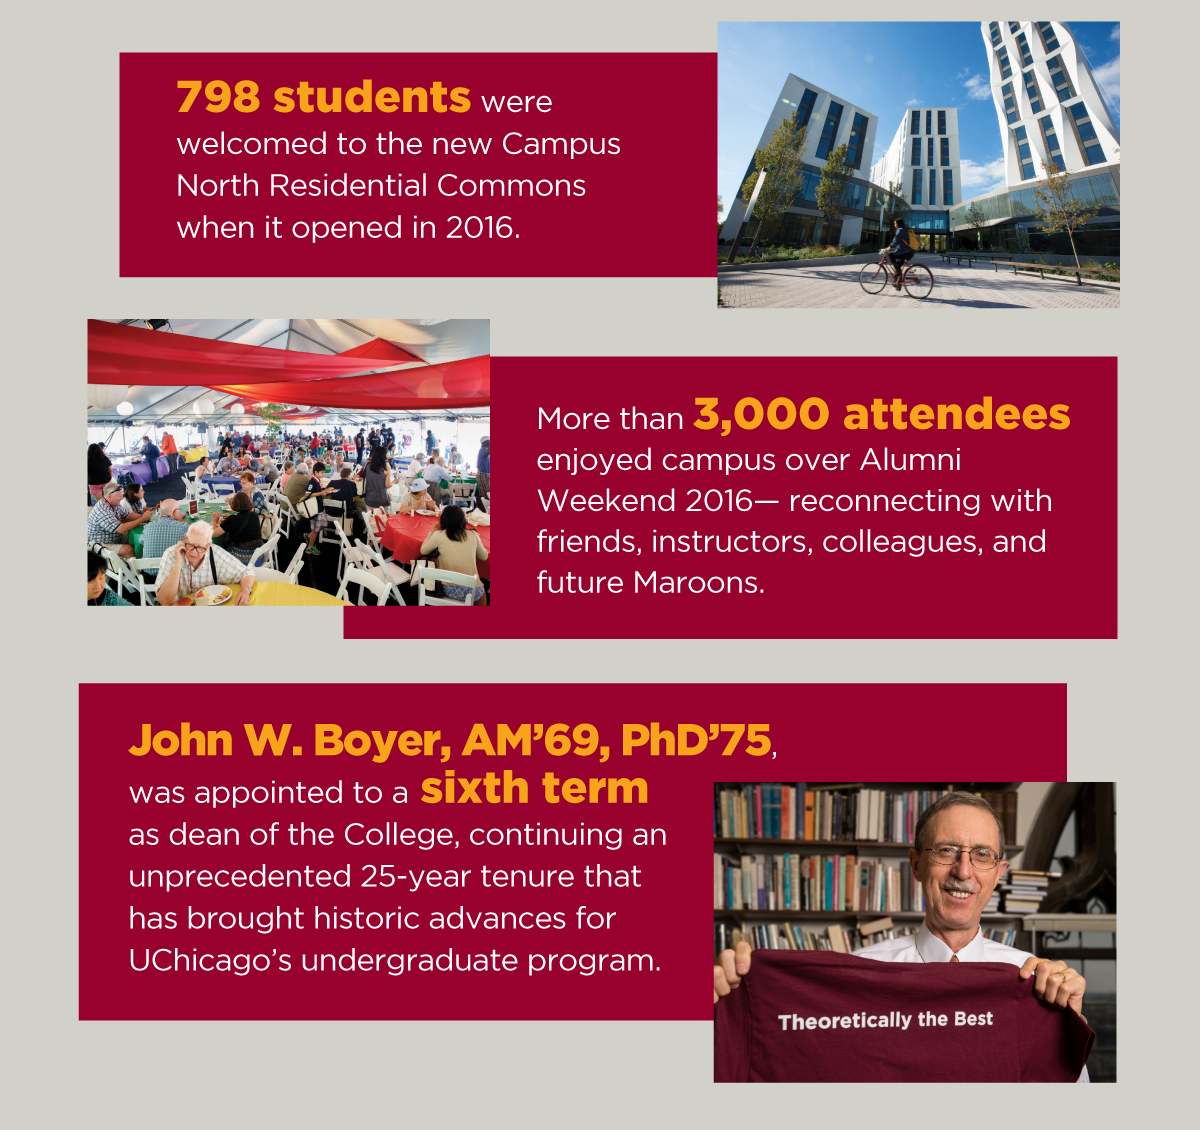 798 students were welcomed to the new Campus North Residential Commons when it opened in 2016. More than 3,000 attendees enjoyed campus over Alumni Weekend 2016— reconnecting with friends, instructors, colleagues, and future Maroons. John W. Boyer, AM'69, PhD'75, was appointed to a sixth term as dean of the College, continuing an unprecedented 25-year tenure that has brought historic advances for UChicago's undergraduate program.